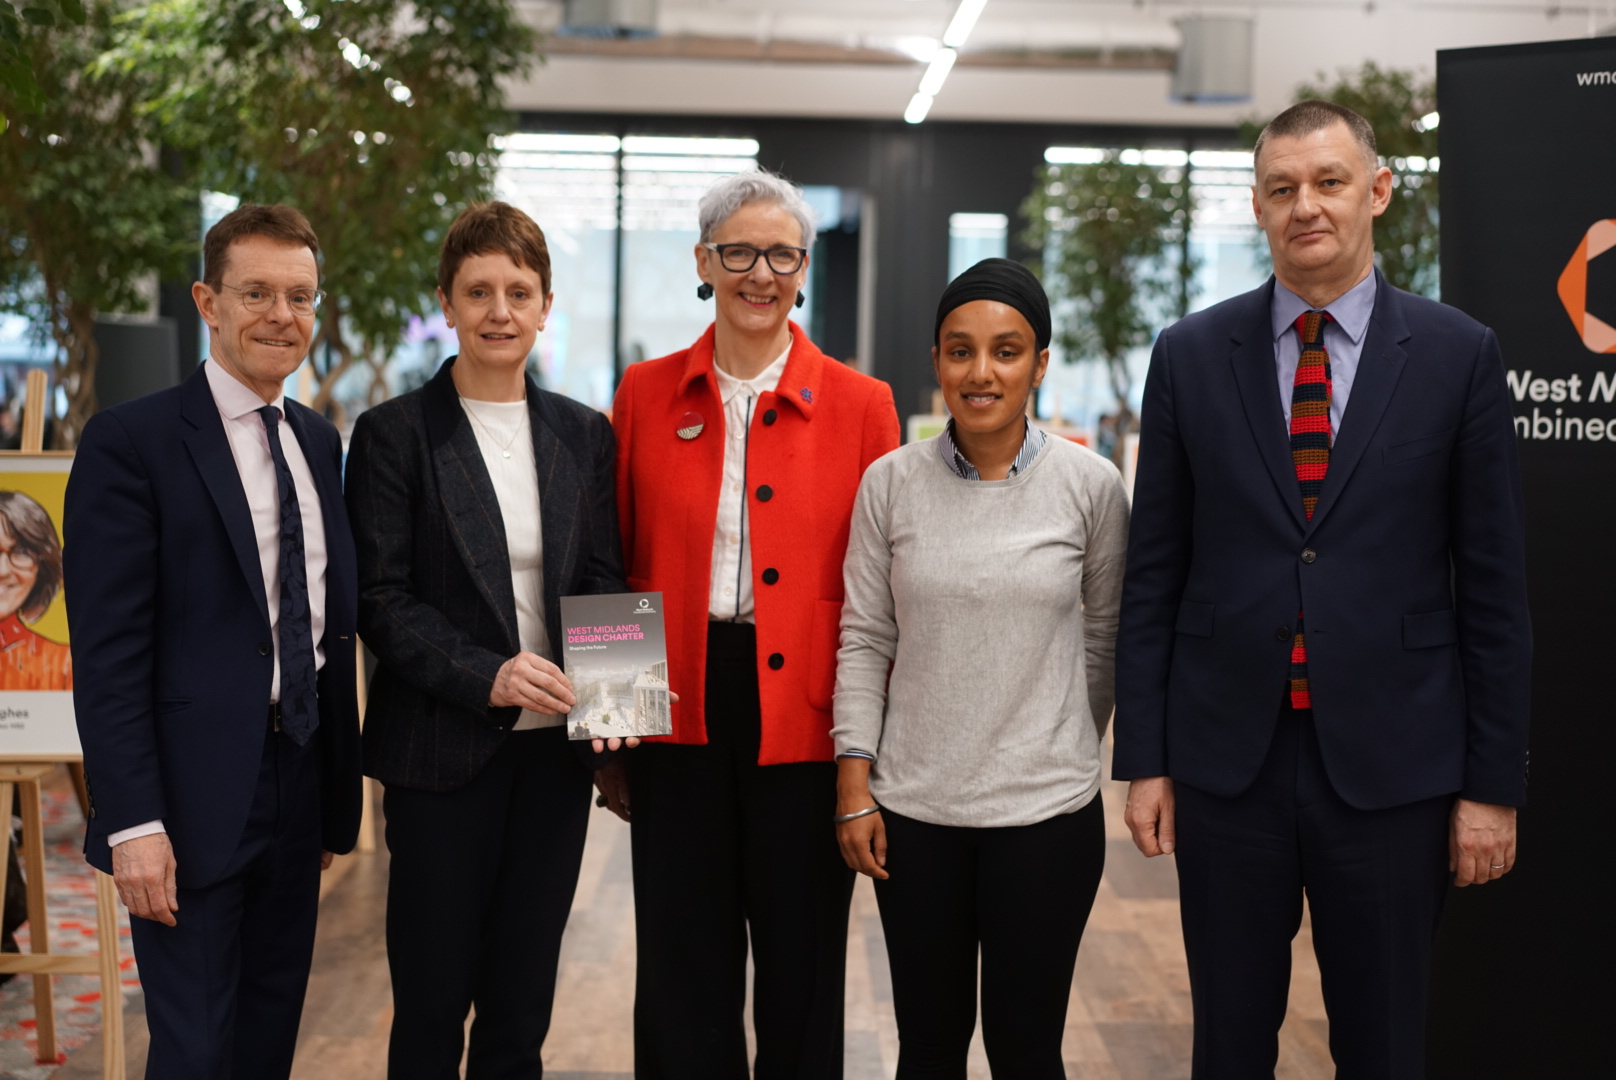 From left:  Mayor of the West Midlands Andy Street, Jane Findlay, President Elect Landscape Institute, Sarah Weir CEO Design Council, Immy Kaur founder of Civic Square and Nick Walkley, chief executive of Homes England